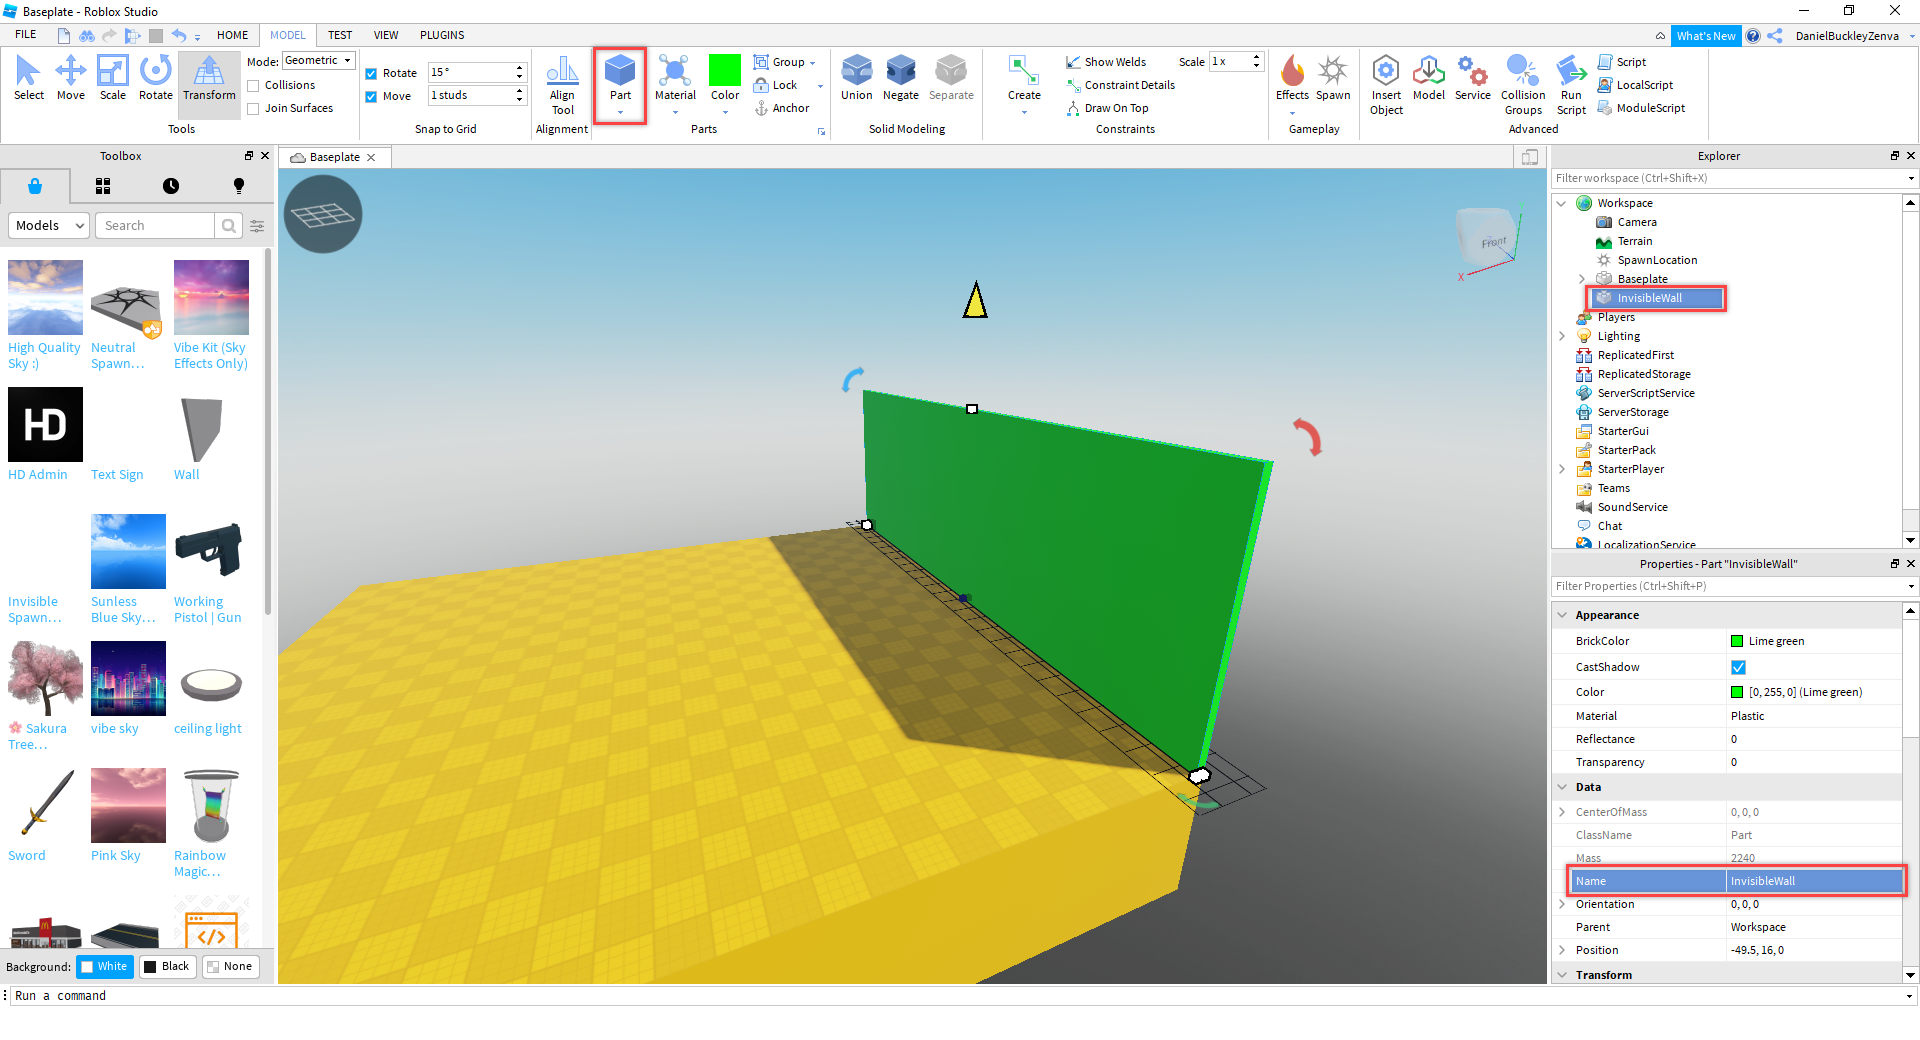 creating an invisible wall in Roblox Studio arena level